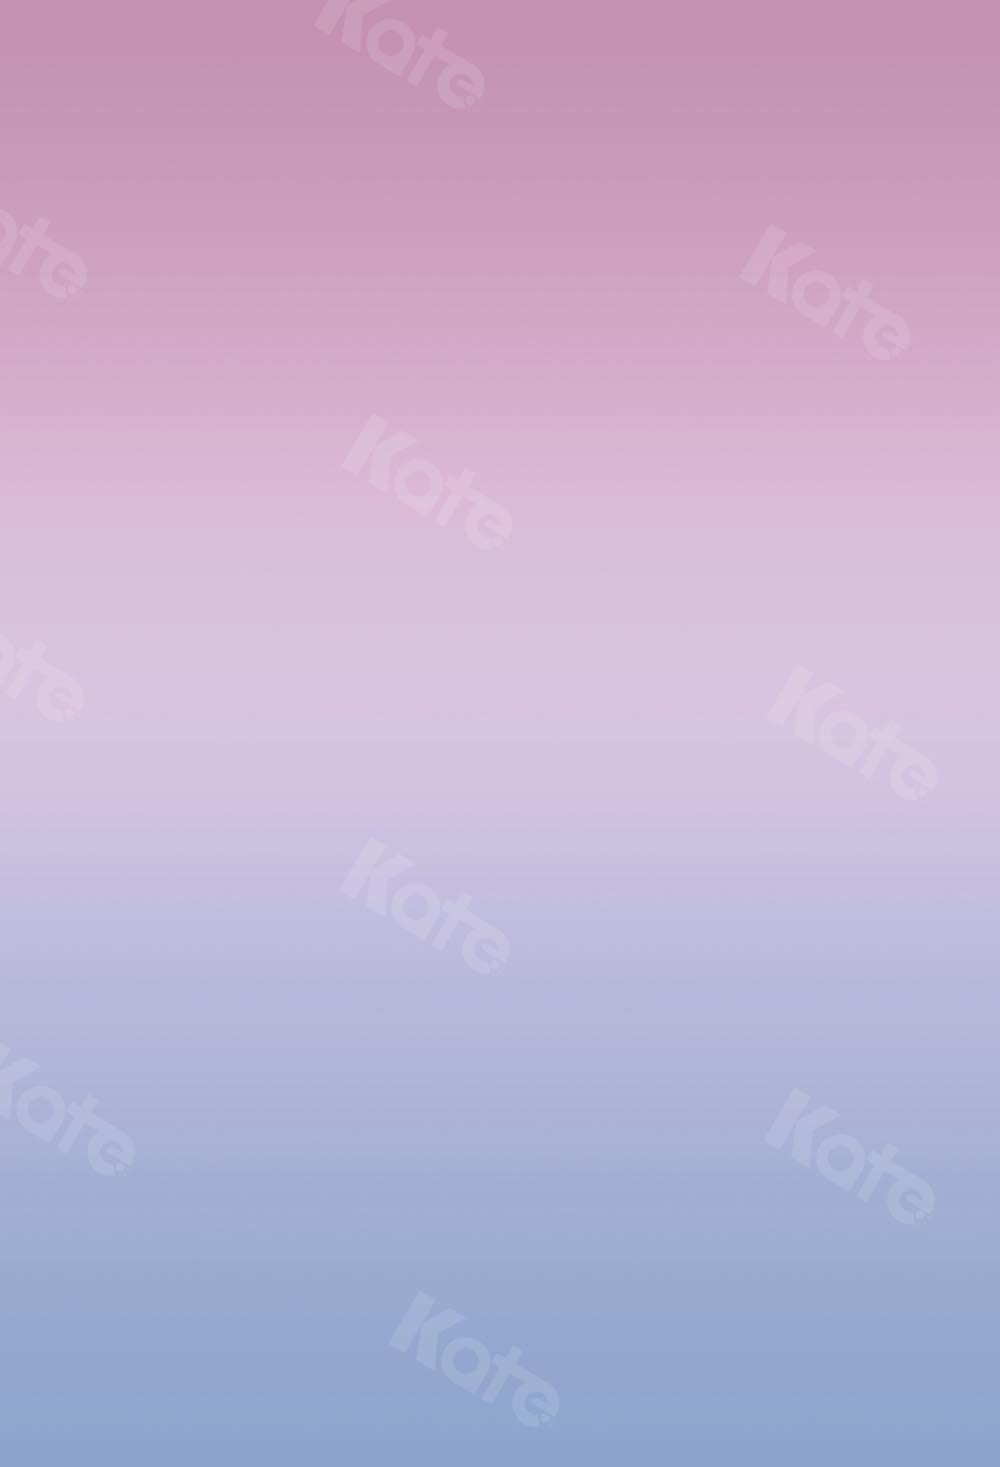 Kate Abstract Pink Gradient Purple Backdrop Designed by Kate Image